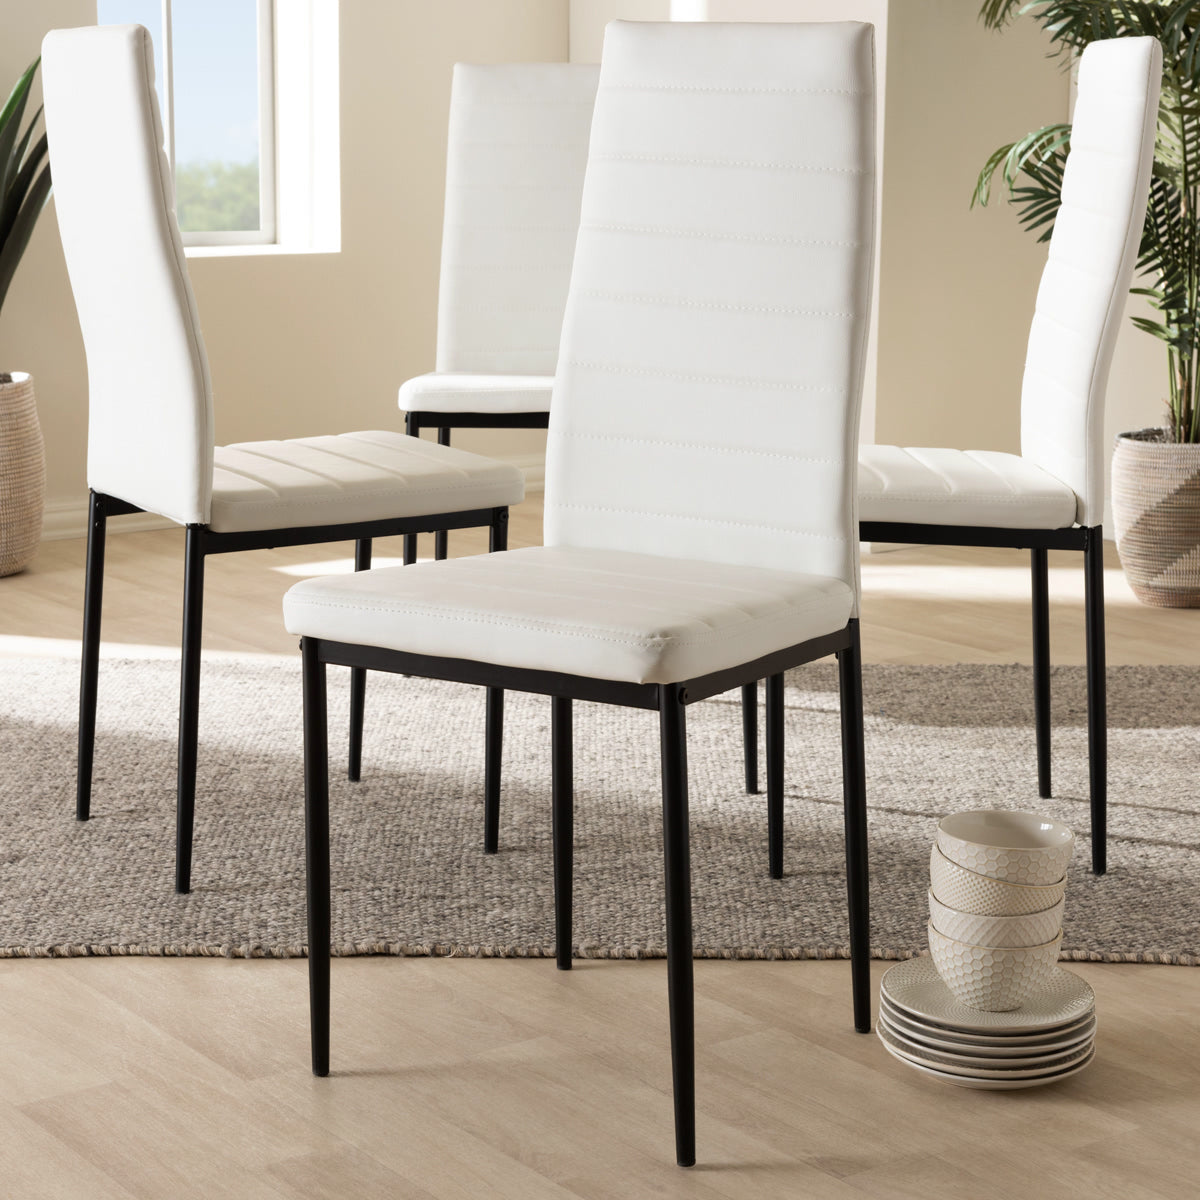 Baxton Studio Armand Modern and Contemporary White Faux Leather Upholstered Dining Chair (Set of 4) Baxton Studio-dining chair-Minimal And Modern - 3